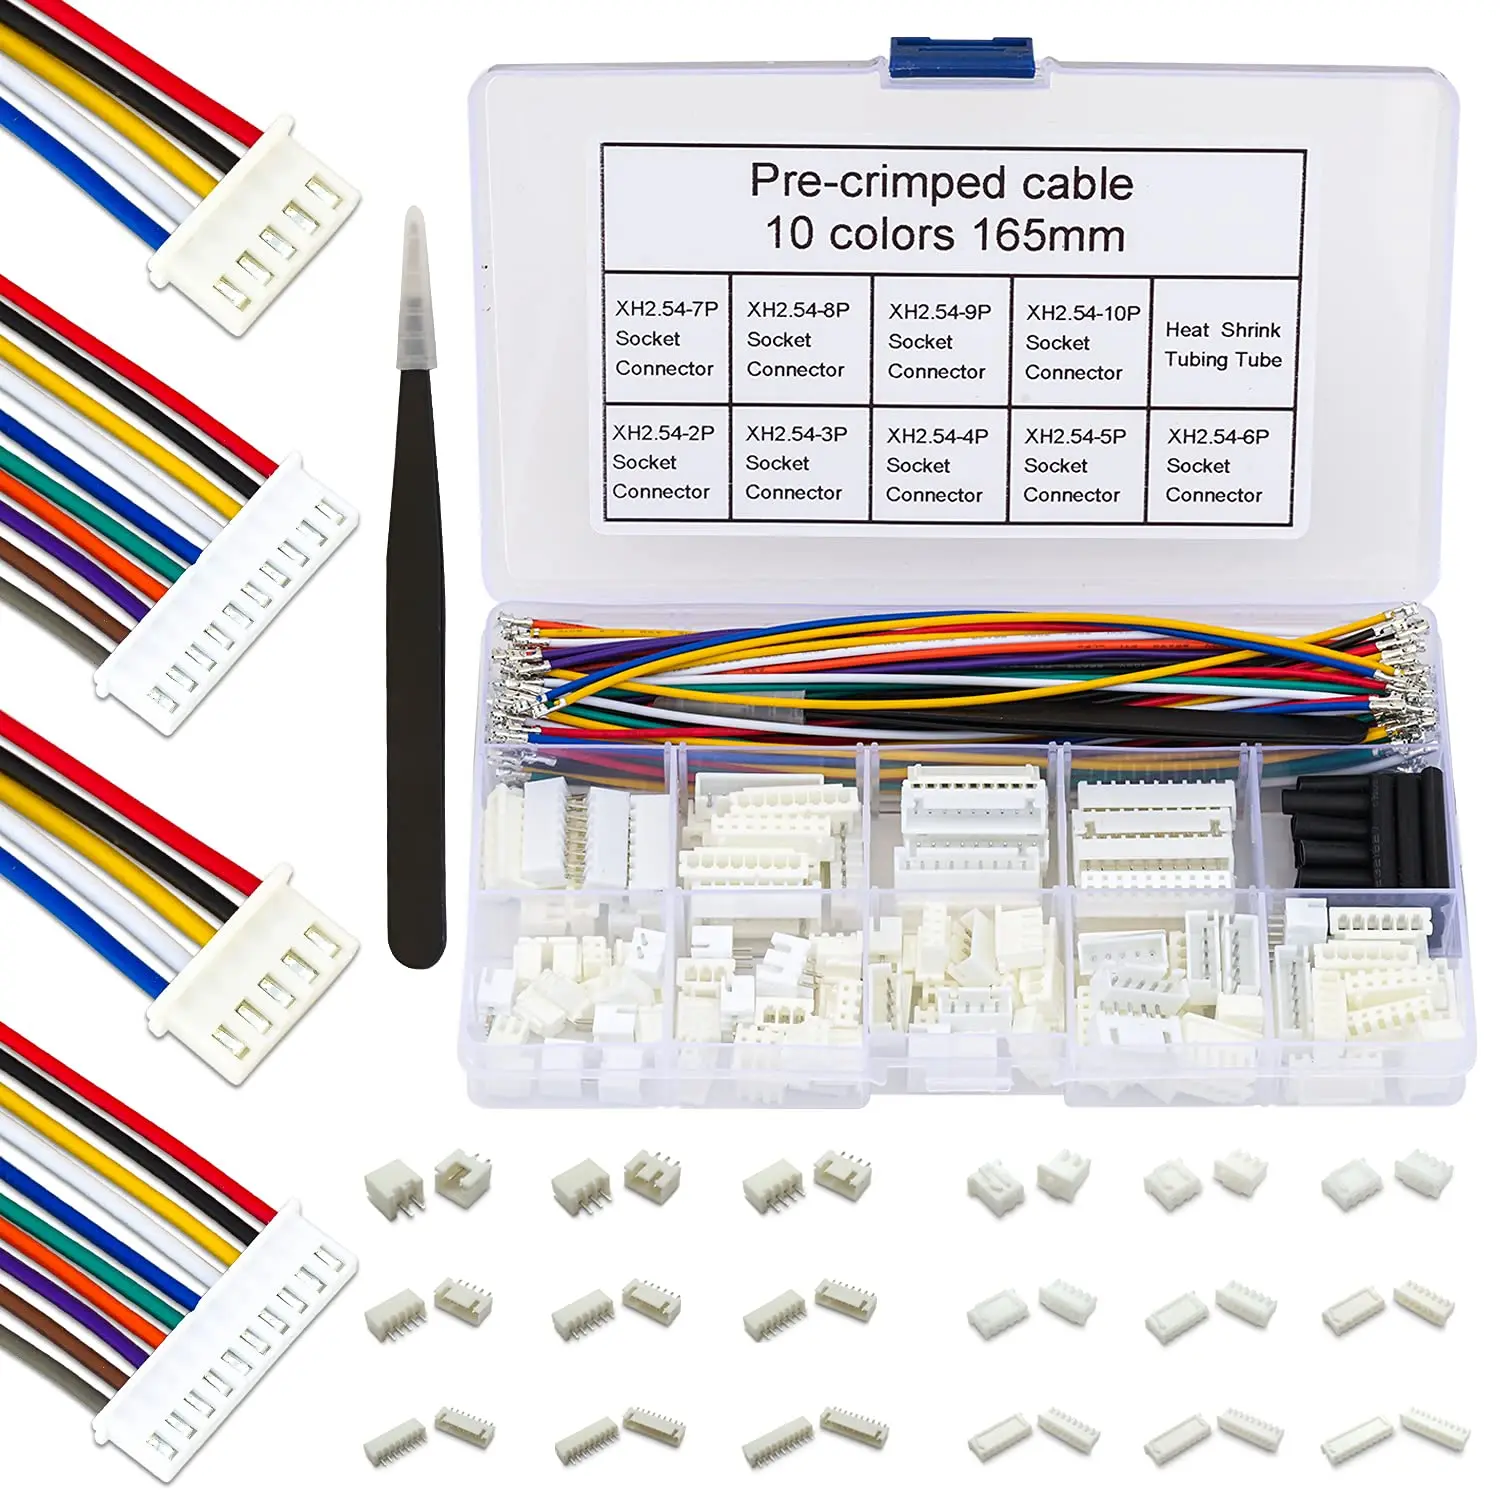 JST 1.0/1.25/1.5/2.0/2.5mm Pitch Connector Kit Jst SH GH ZH PH XH 2-6Pin Housing with Pre-crimped 22-28AWG Cables